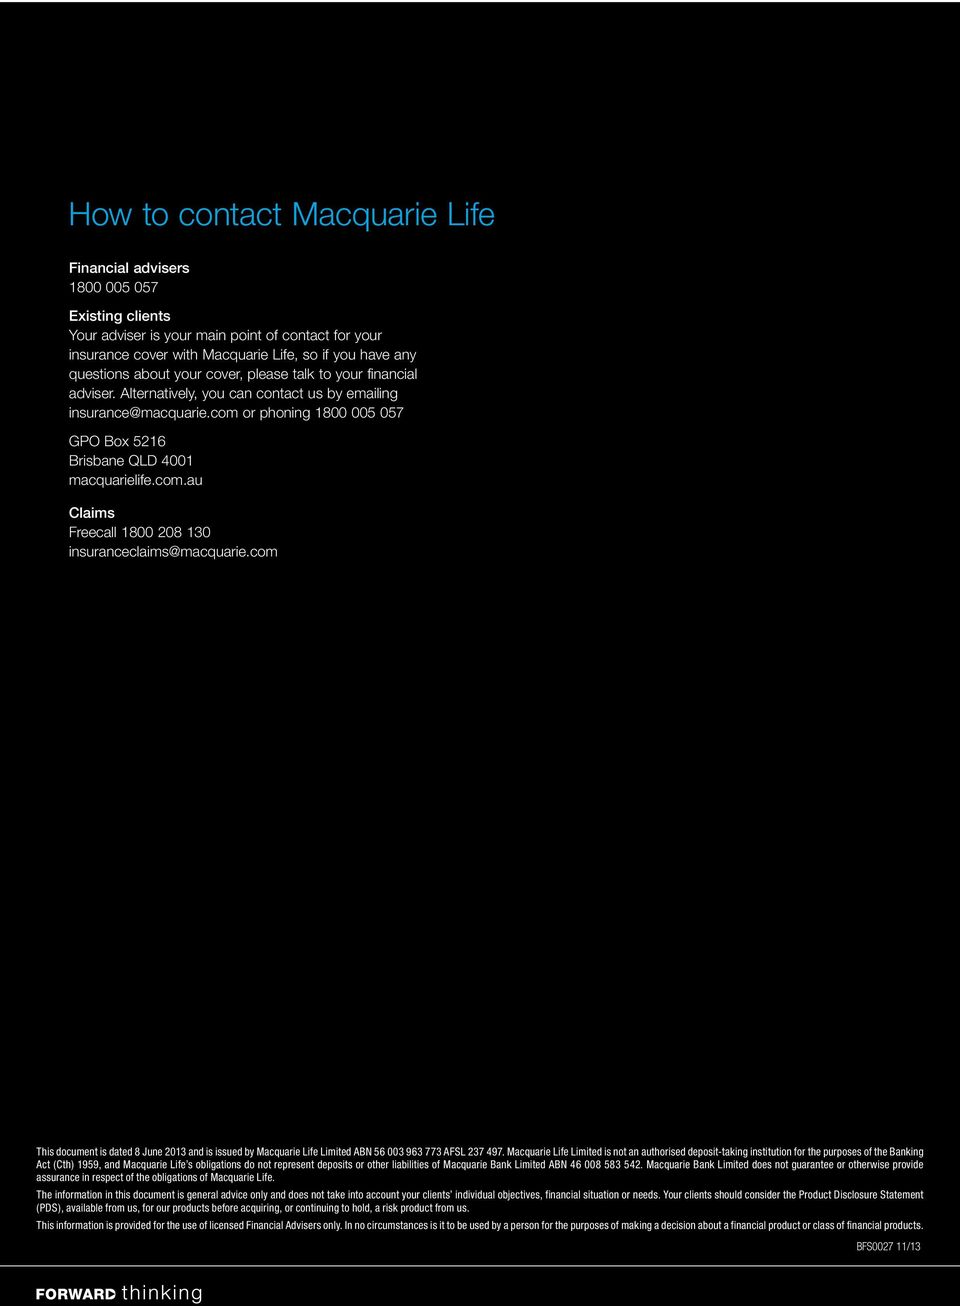 com This document is dated 8 June 2013 and is issued by Macquarie Life Limited ABN 56 003 963 773 AFSL 237 497.